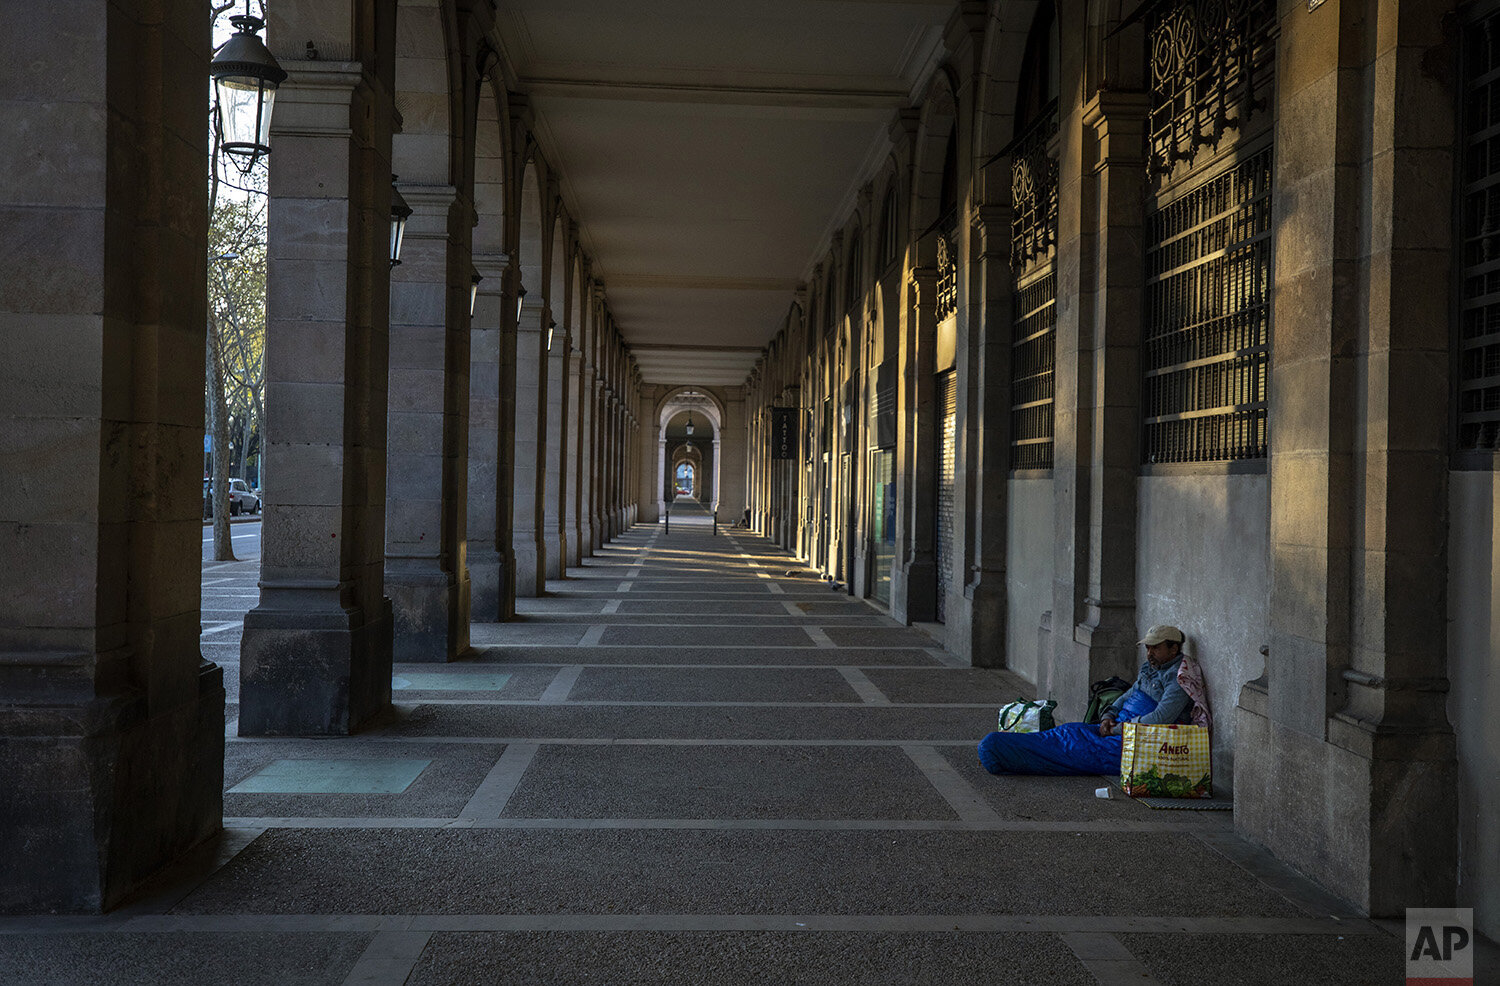  In this Friday, March 20, 2020, Riccardo, 32, sits in empty arcades in downtown Barcelona, Spain. "I thought I had seen everything during all these years sleeping in the street, but no. This silence on the street all day scares me... more than the v